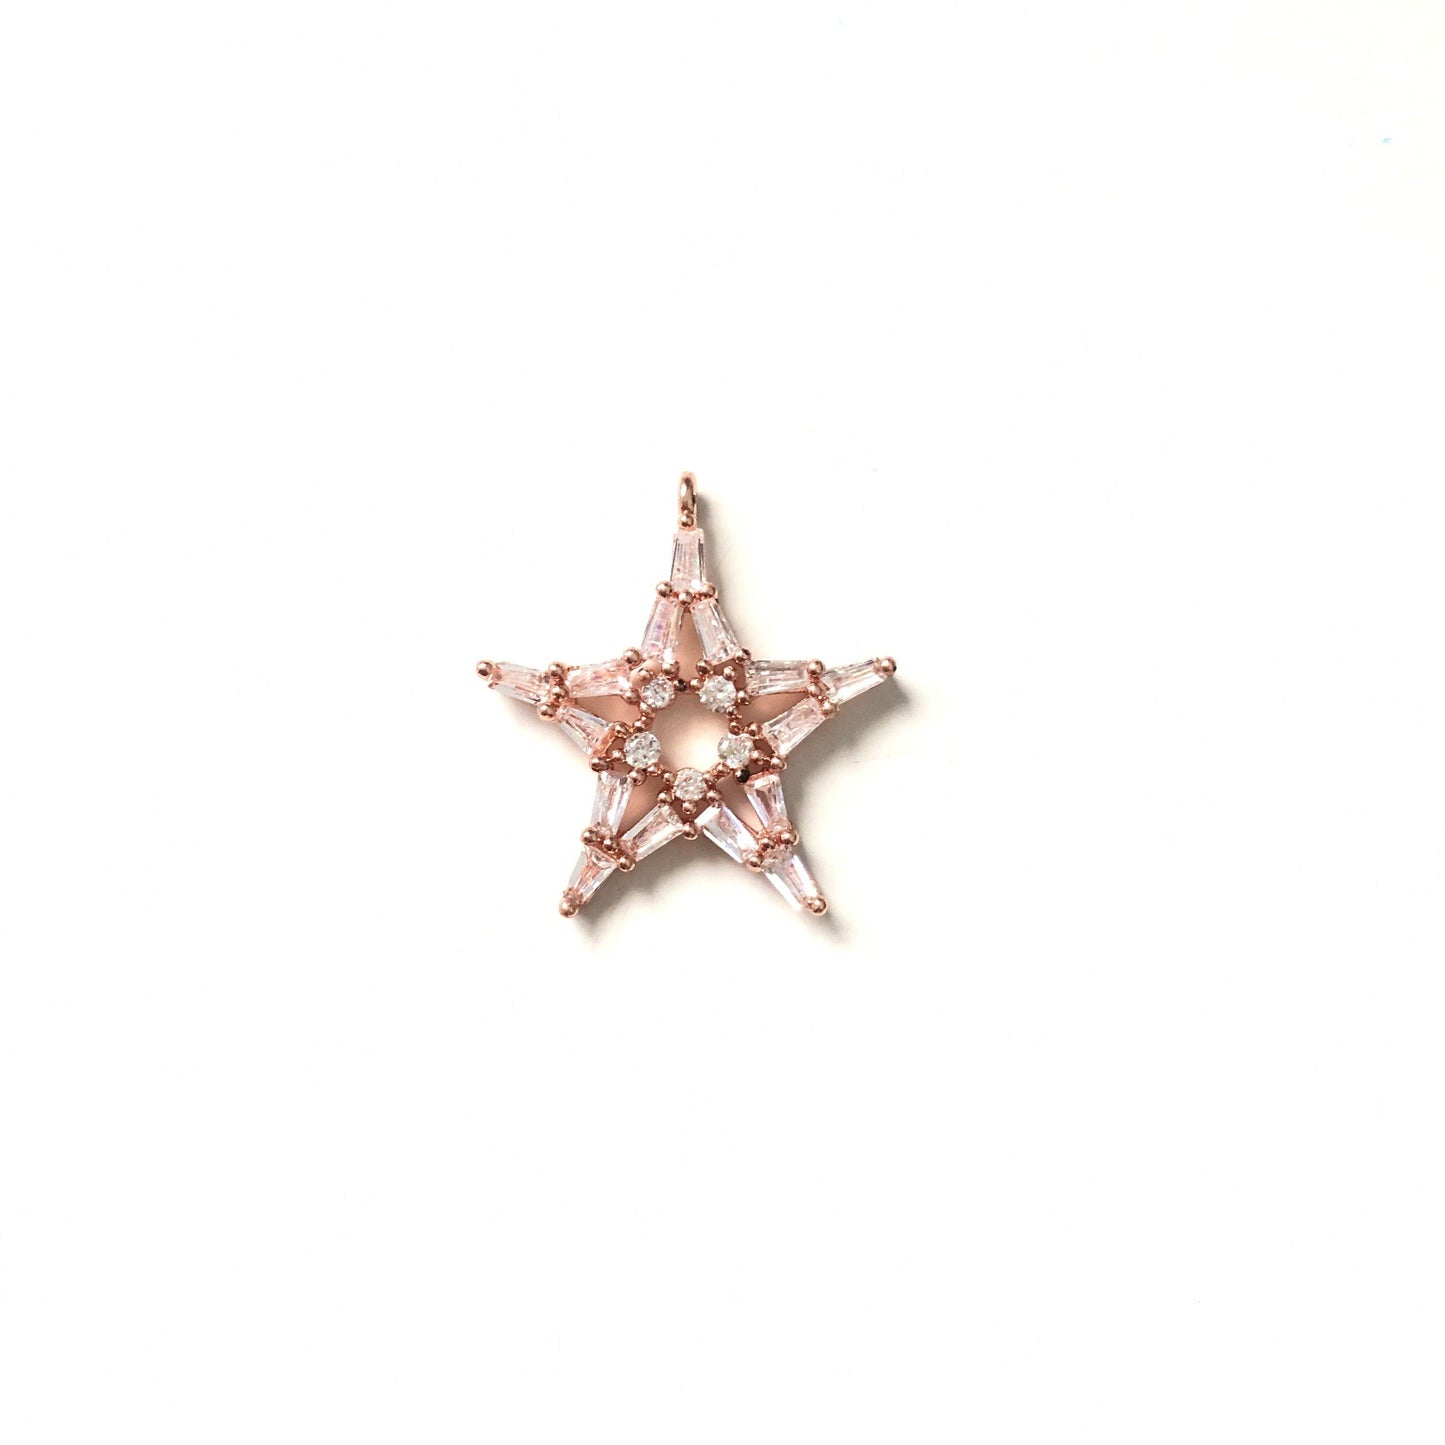 10pcs/lot 24.5*22mm Clear CZ Paved Star Charms Rose Gold CZ Paved Charms Sun Moon Stars Charms Beads Beyond